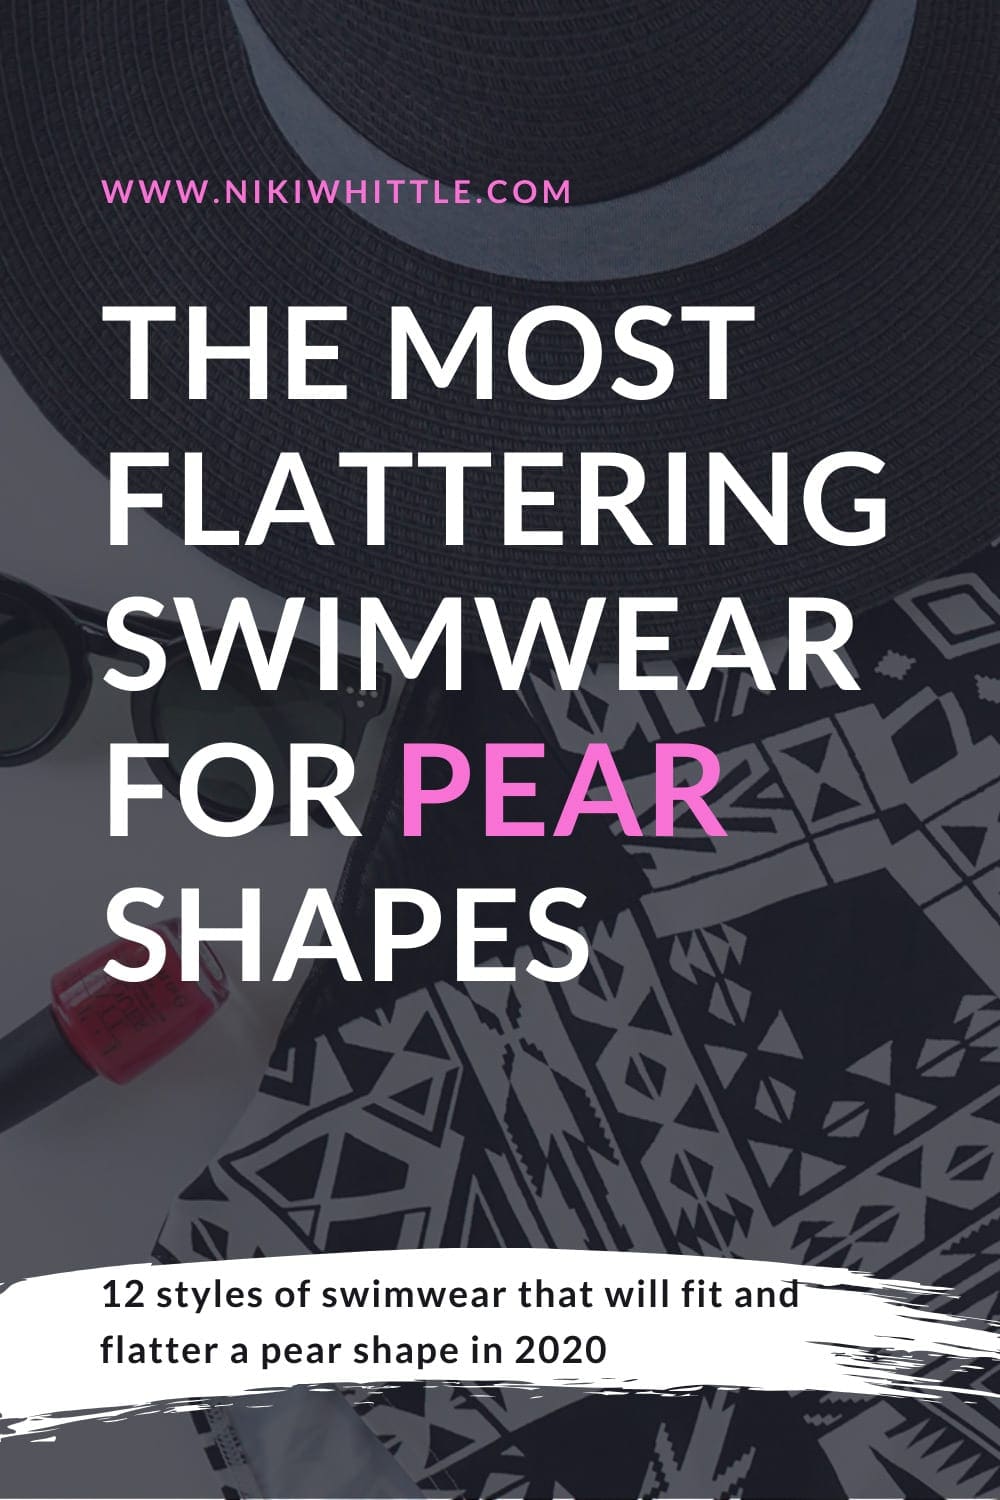 The best swimwear for pear shapes